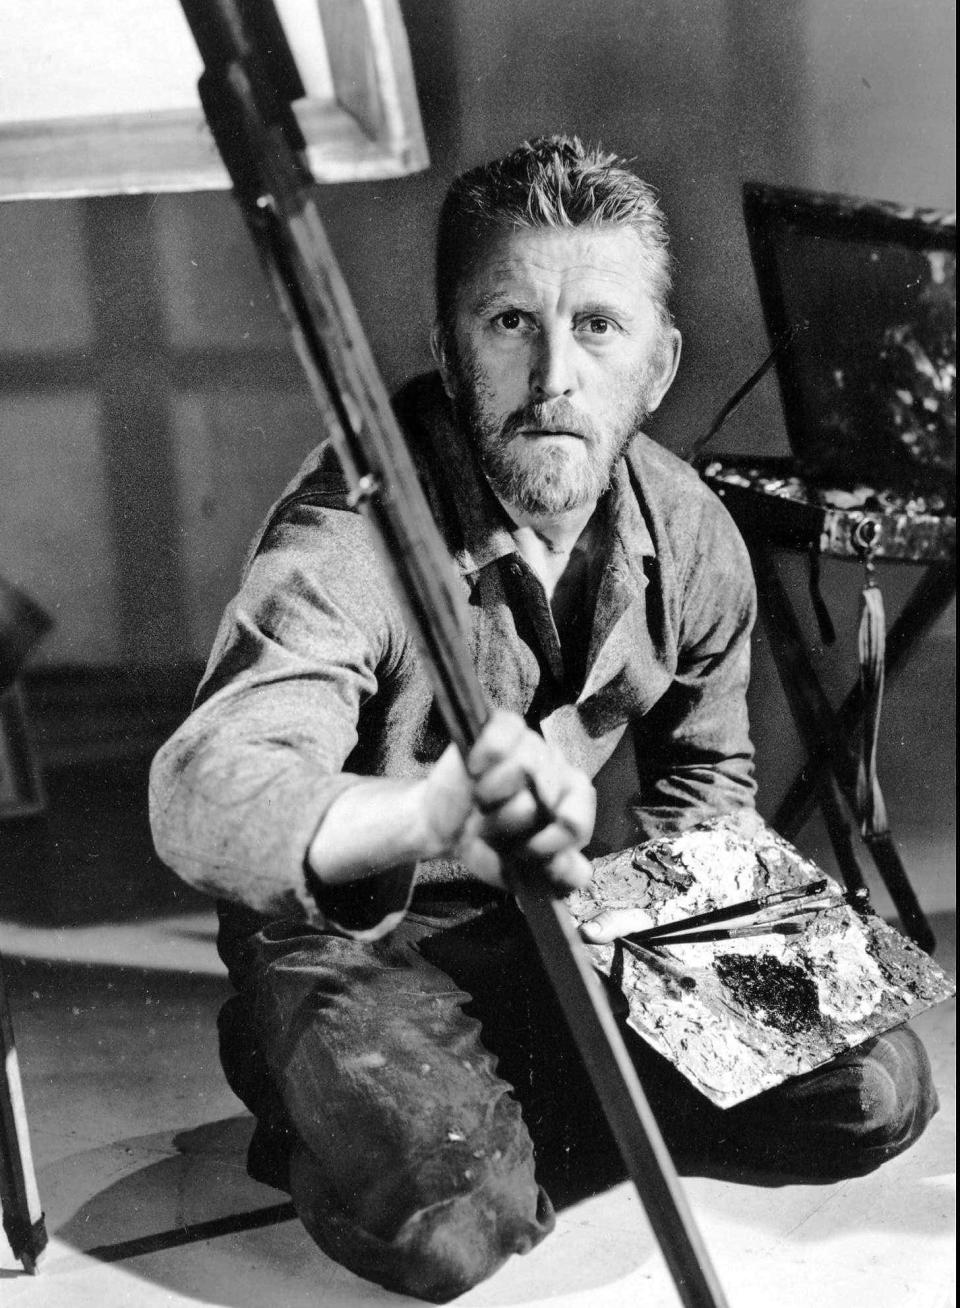 Kirk Douglas was nominated for a best-actor Oscar for playing artist Vincent van Gogh in the 1956 movie "Lust For Life."